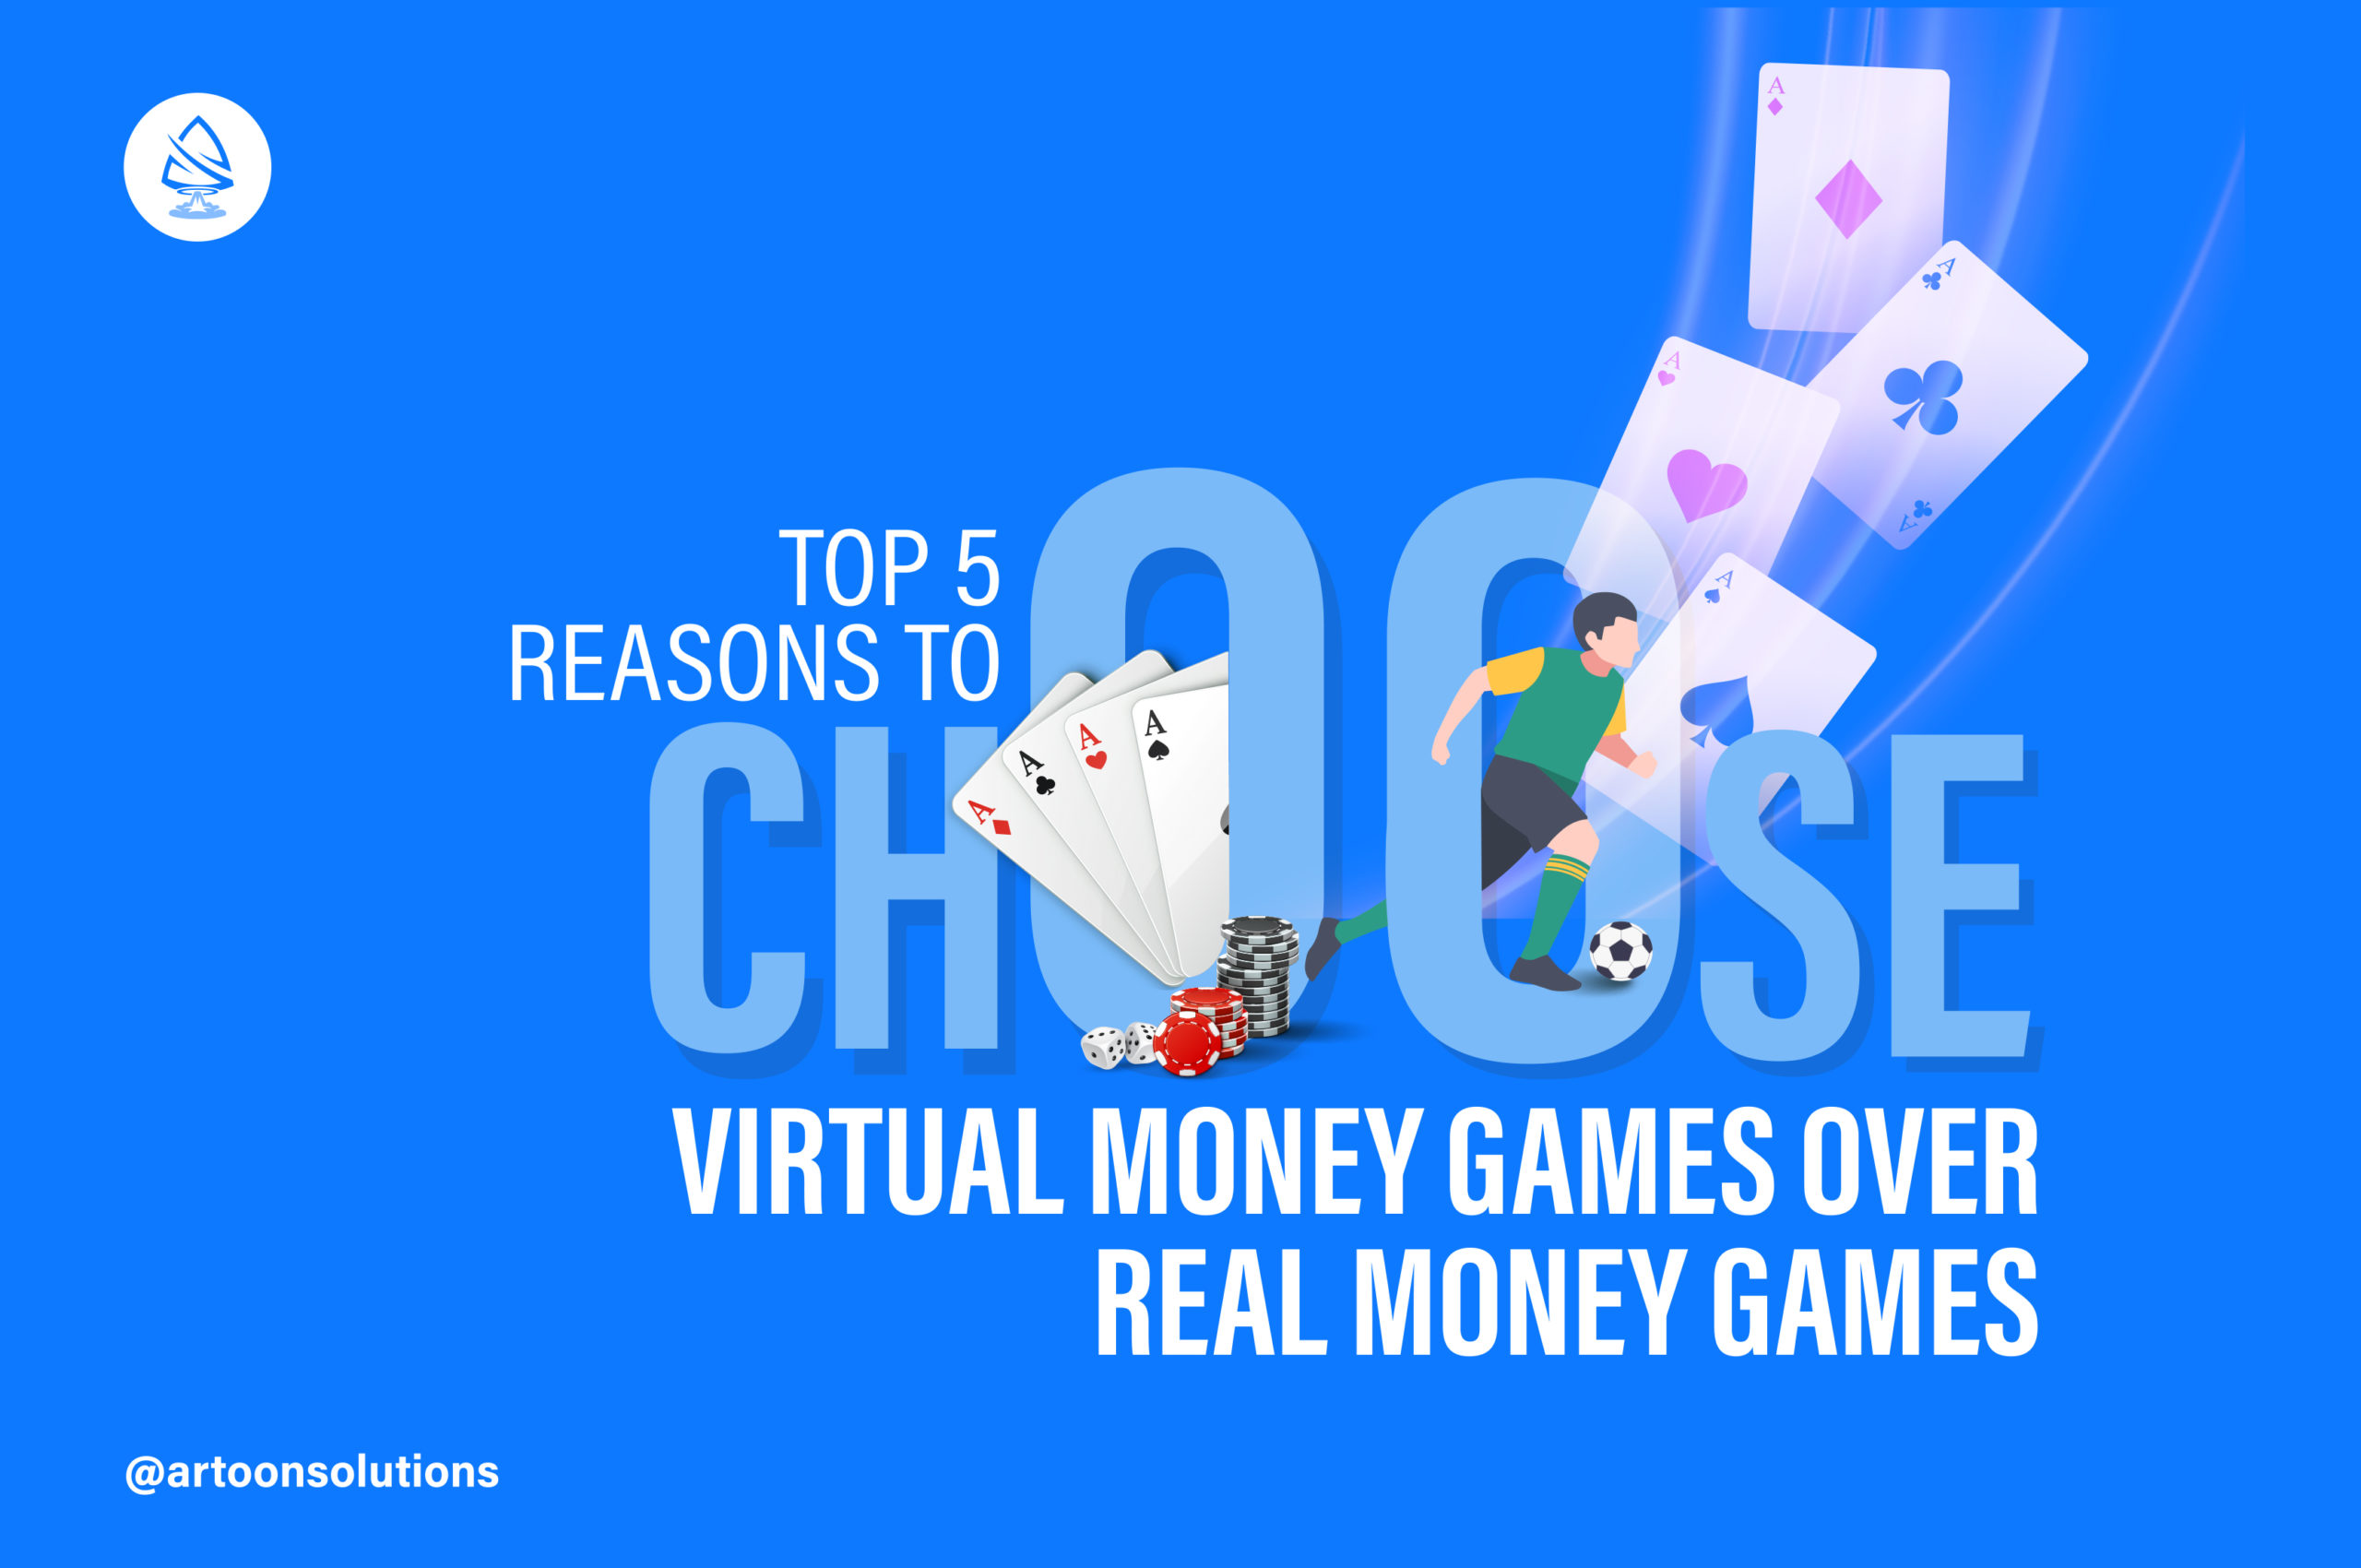 Game of luck/chance, risk-free gameplay, and the chance to enhance skills for is unlimited are some of the key points that differentiate virtual money games from real money games. 
